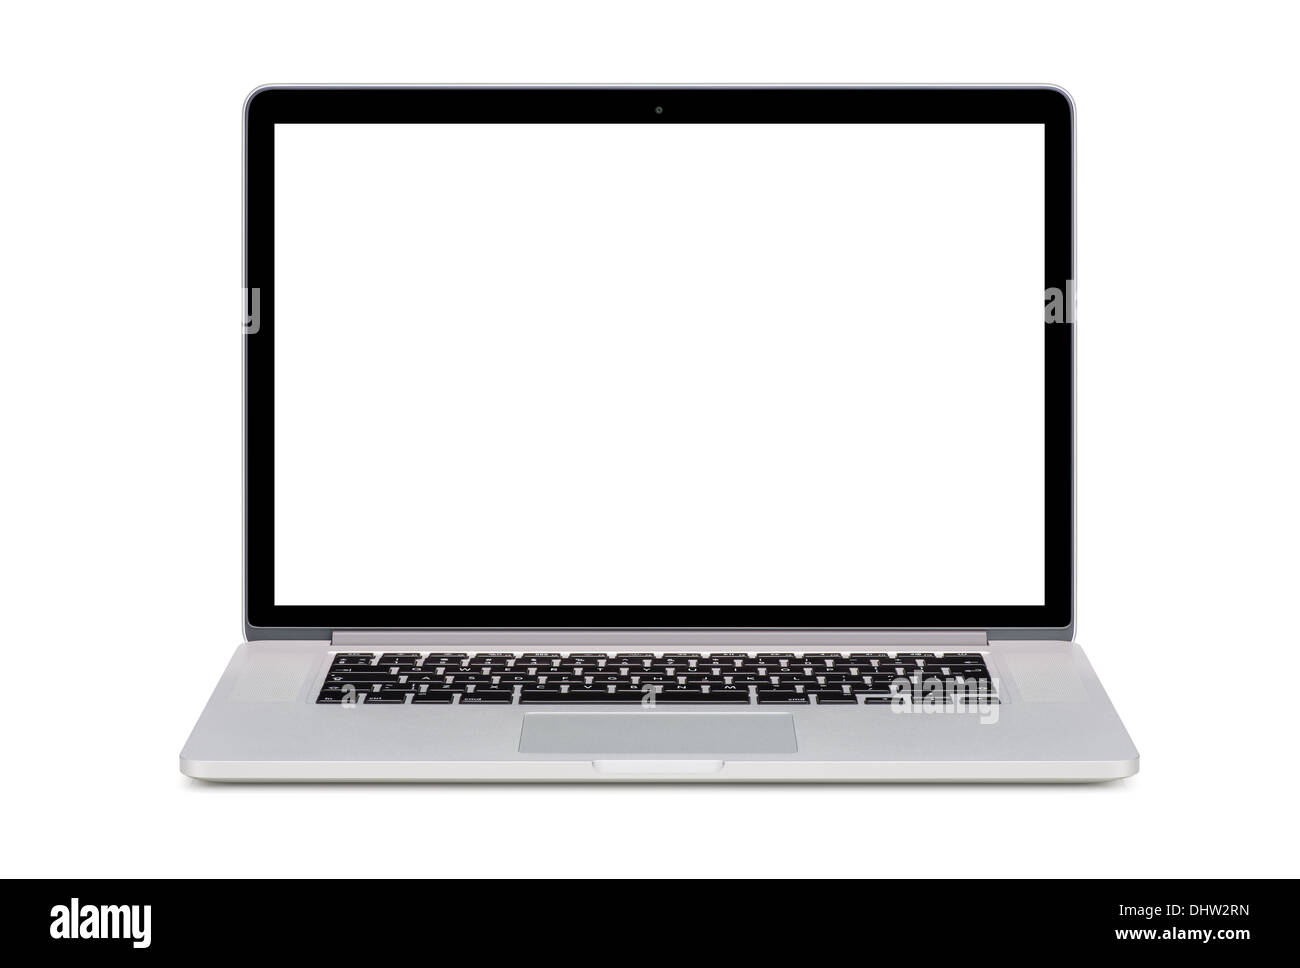 Front view of a modern laptop with a white screen and an English keyboard isolated on white background. High quality. Stock Photo